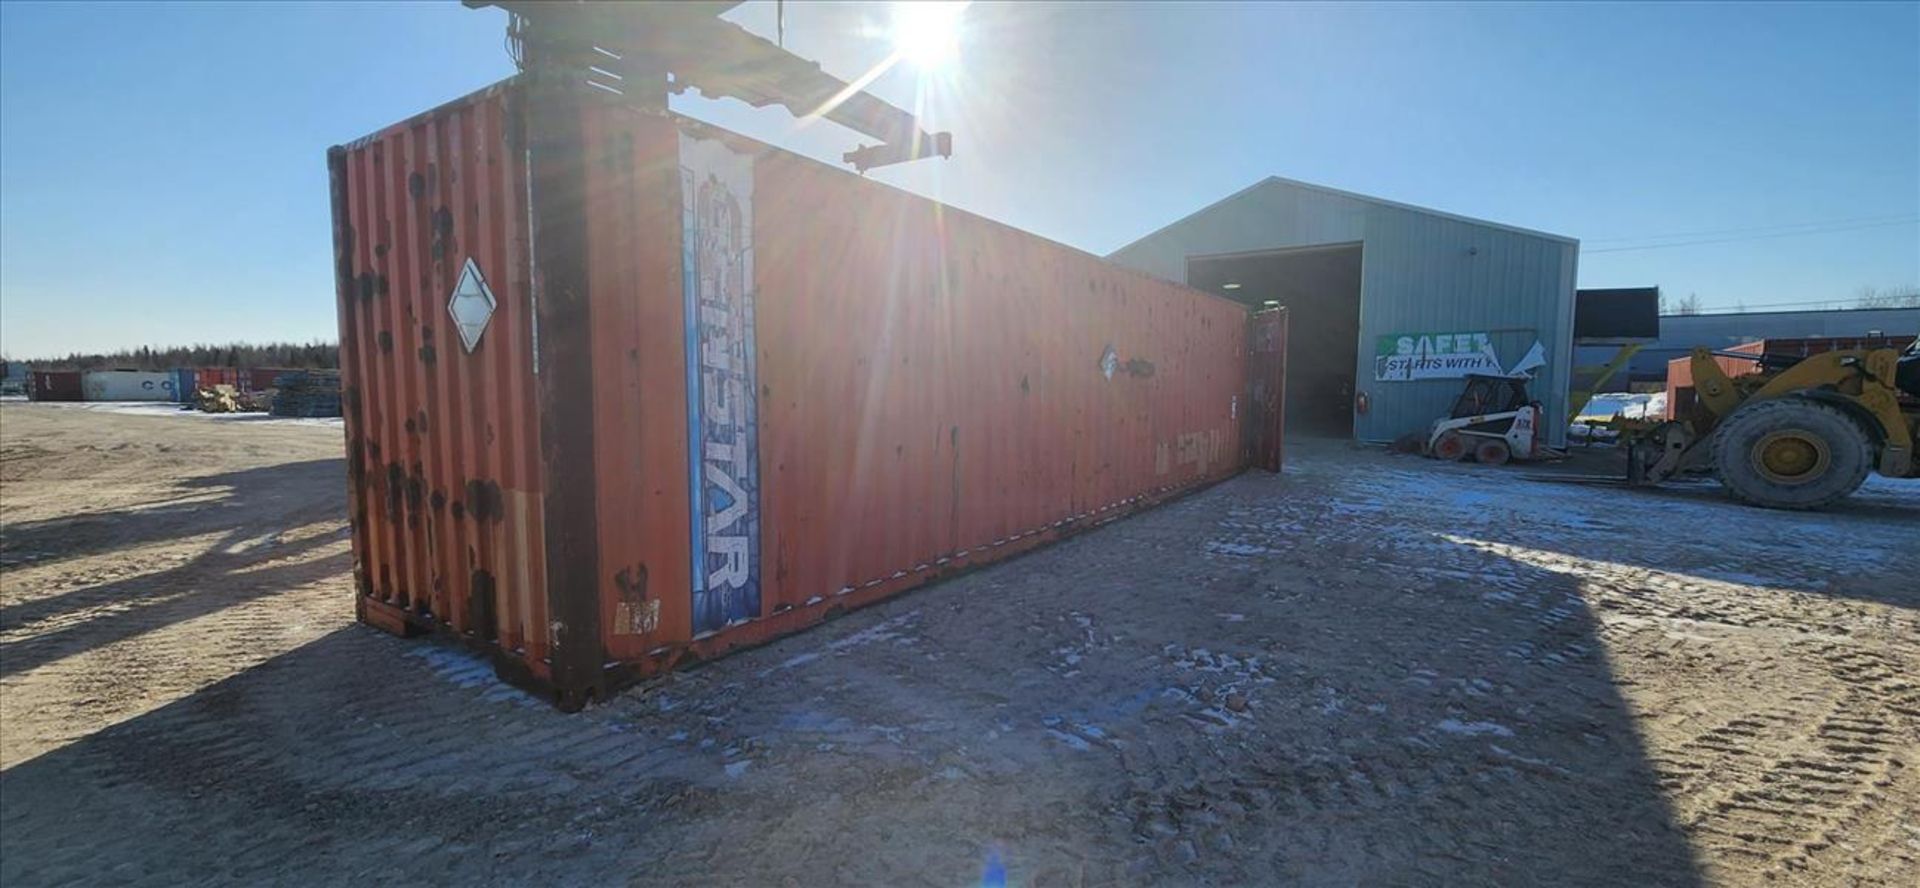 sea container, 40 ft. (delayed removal date applies) (Asset Location: Hallnor Yard) {Day 1} [TAG - Image 2 of 2